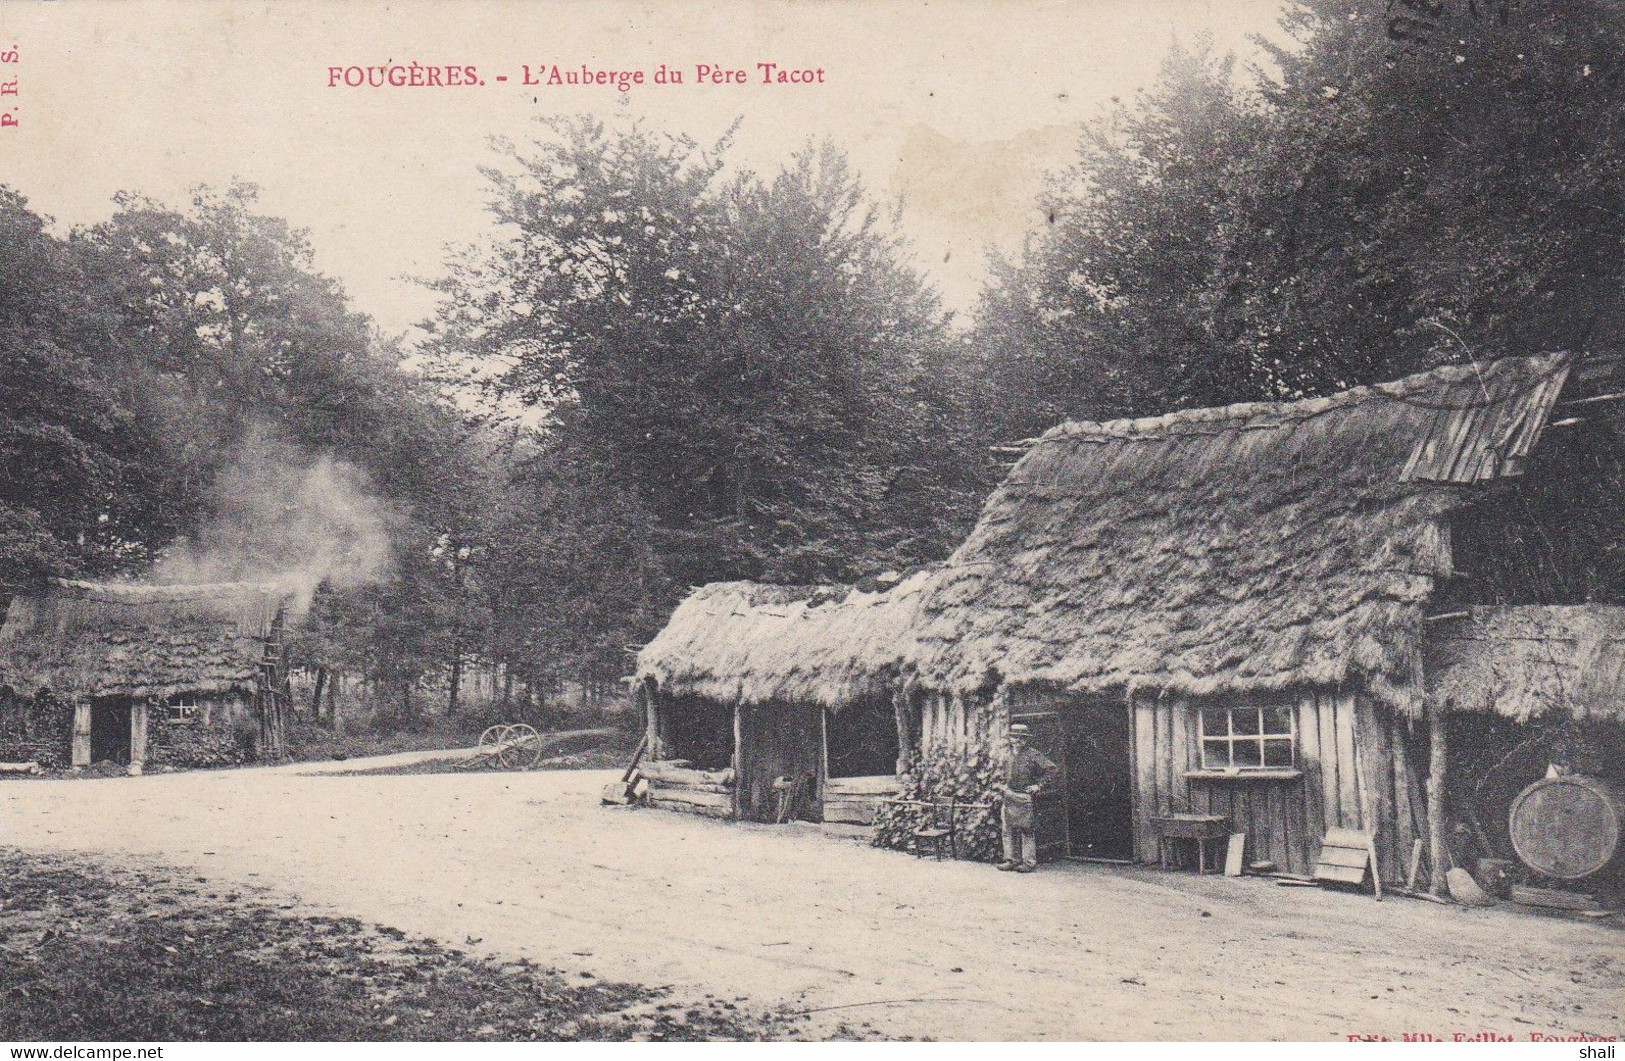 CPA FOUGERES L' AUBERGE DU PERE TACOT - Fougeres